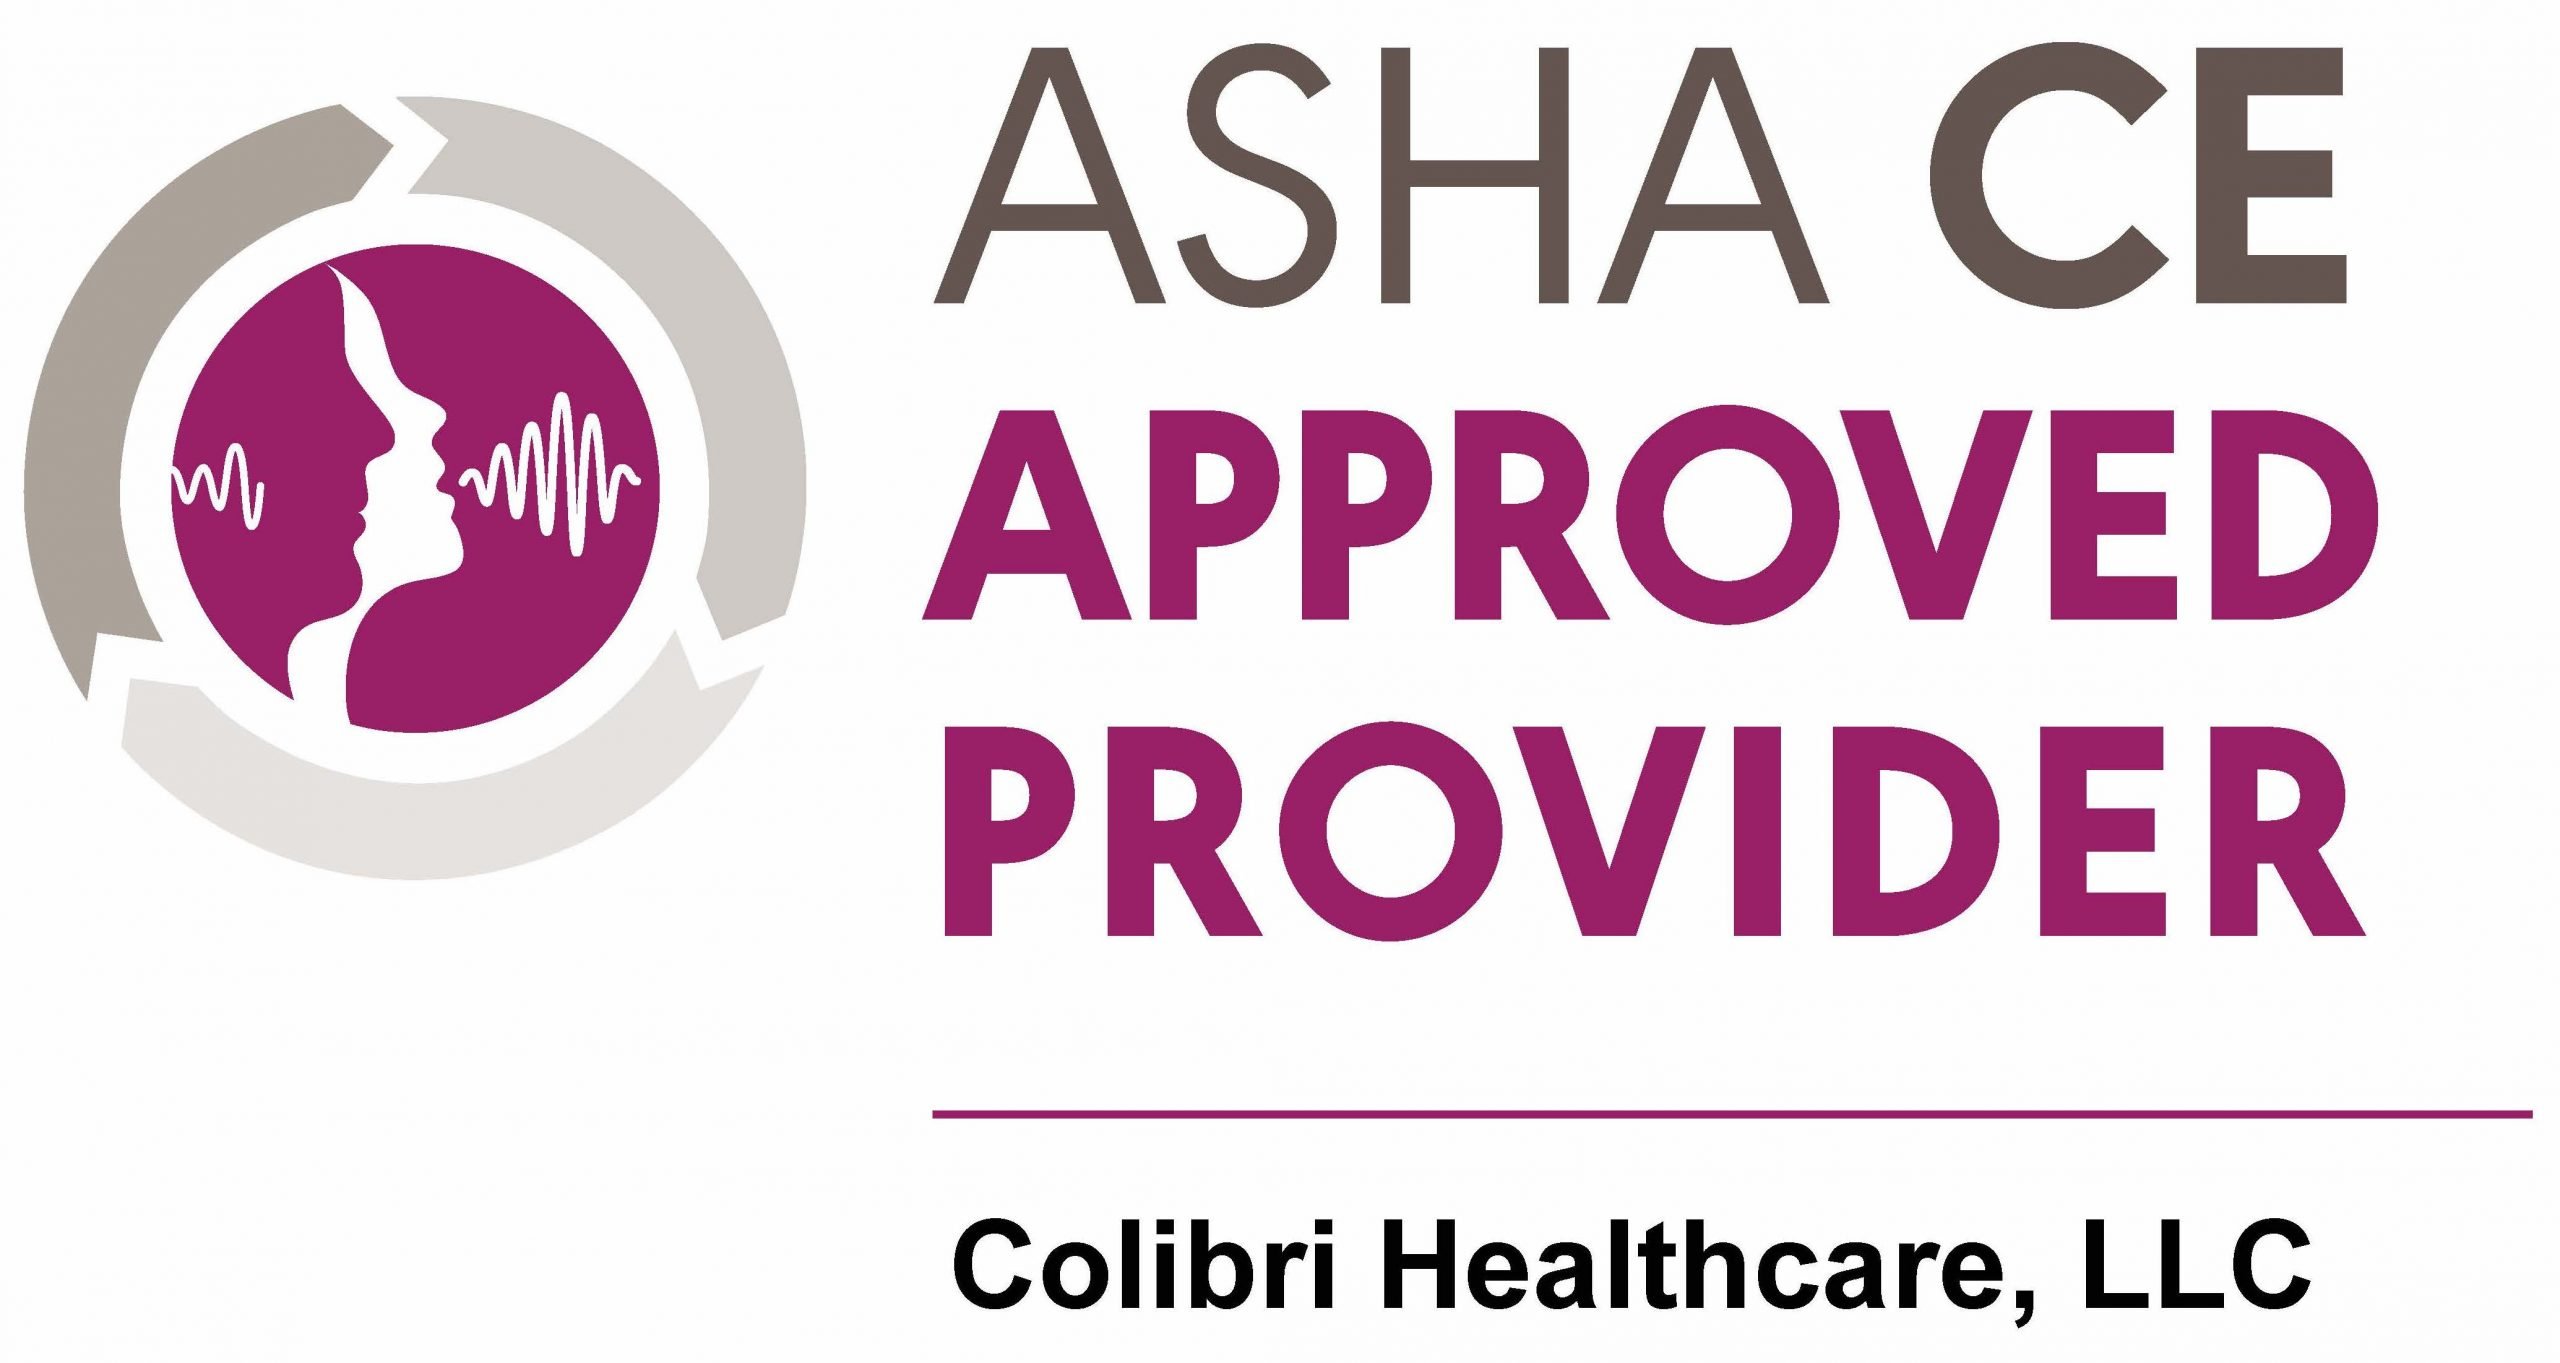 ASHA Approved CE Provider